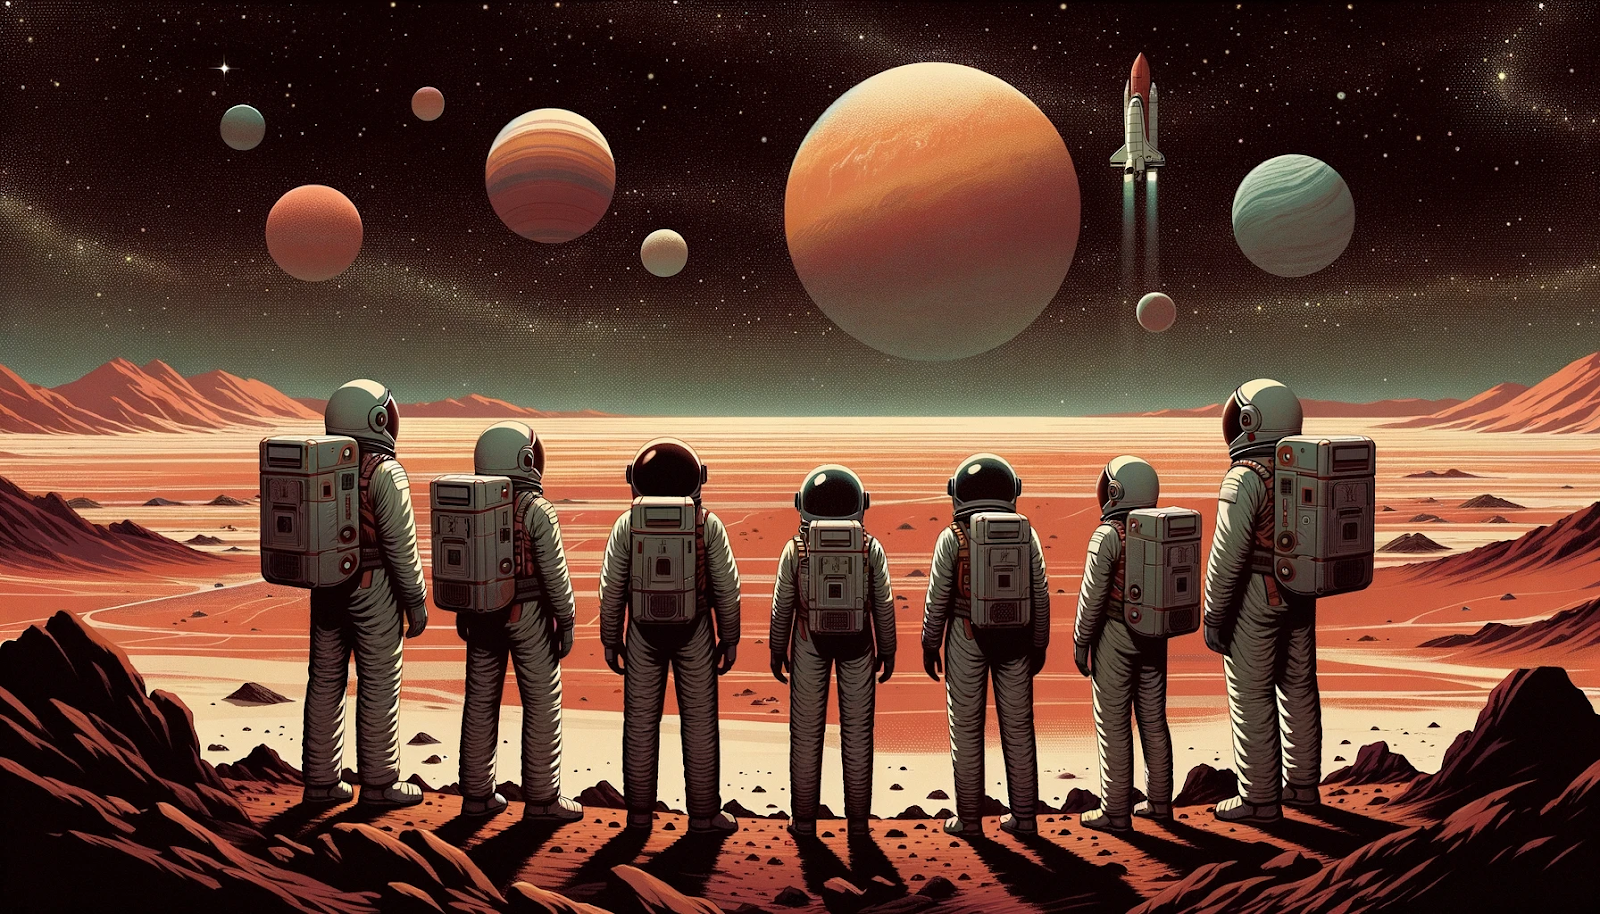 Prompt
Illustration of five astronauts, diverse in gender and descent, standing in awe as they witness the barren Martian expanse, helmets under their arms.